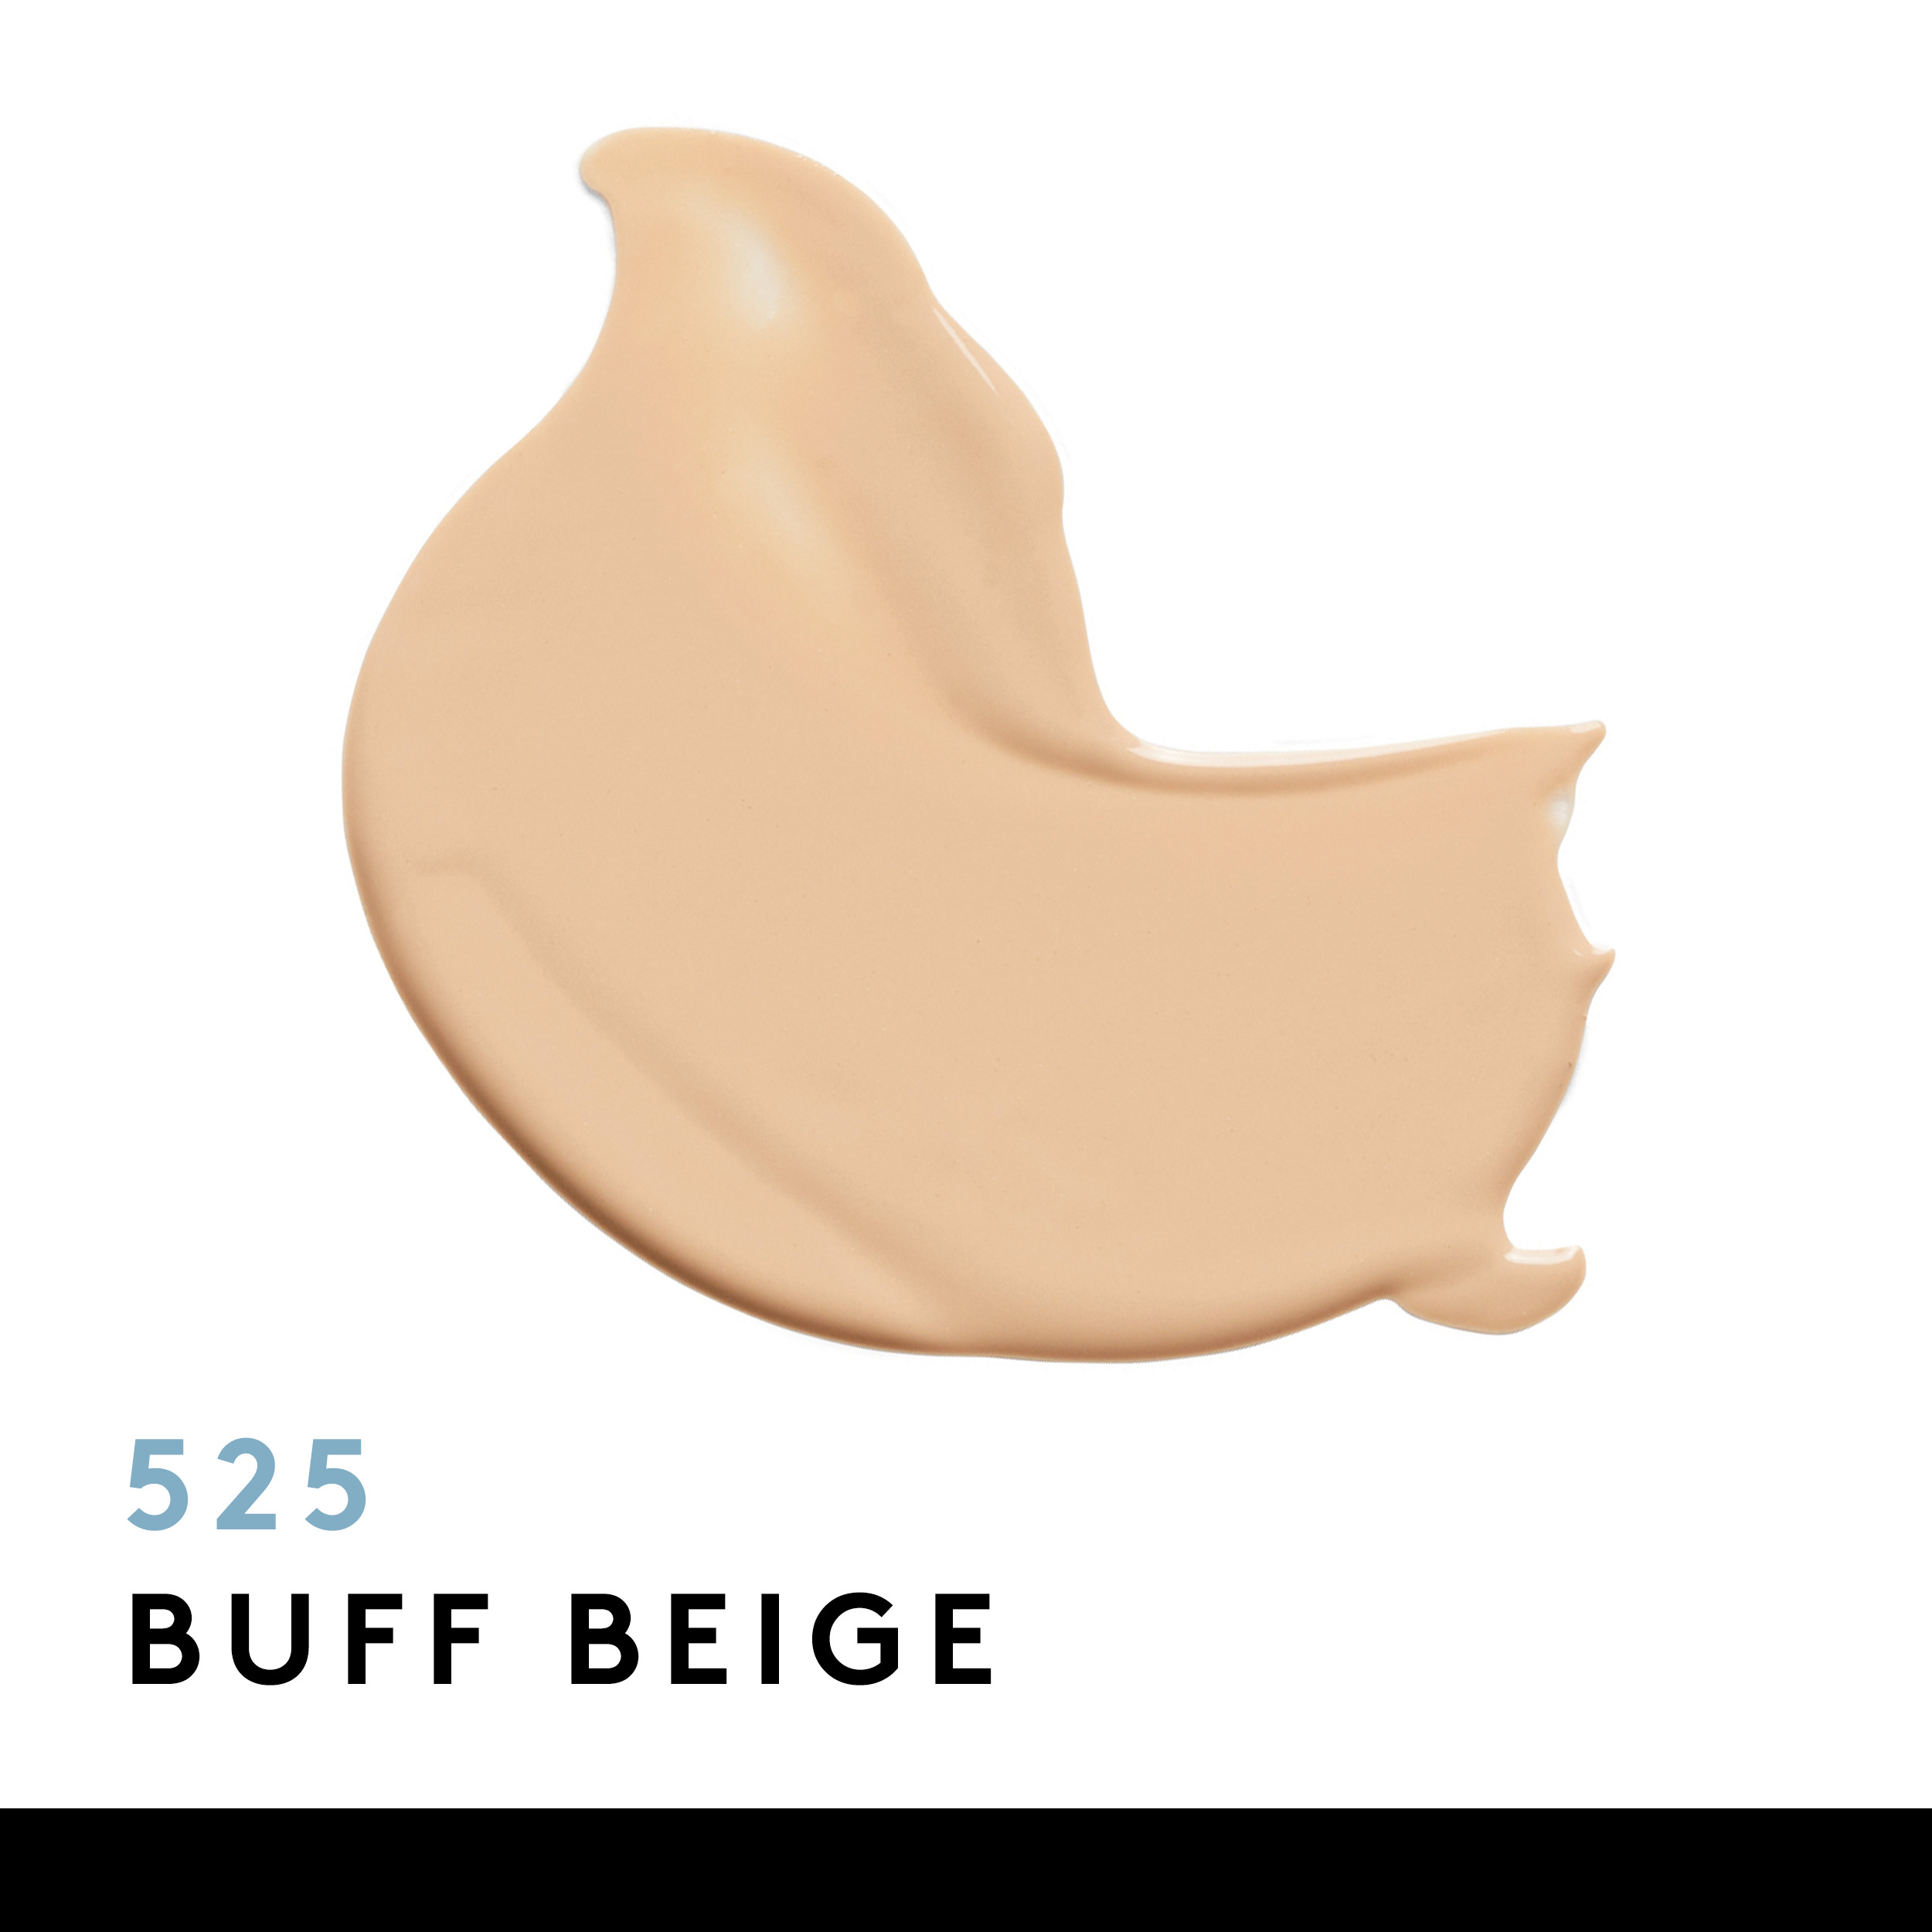 COVERGIRL Clean Matte Liquid Foundation, 525 Buff Beige, 1 fl oz, Liquid Foundation, Matte Foundation, Lightweight Foundation, Moisturizing Foundation, Water Based Foundation - image 2 of 8